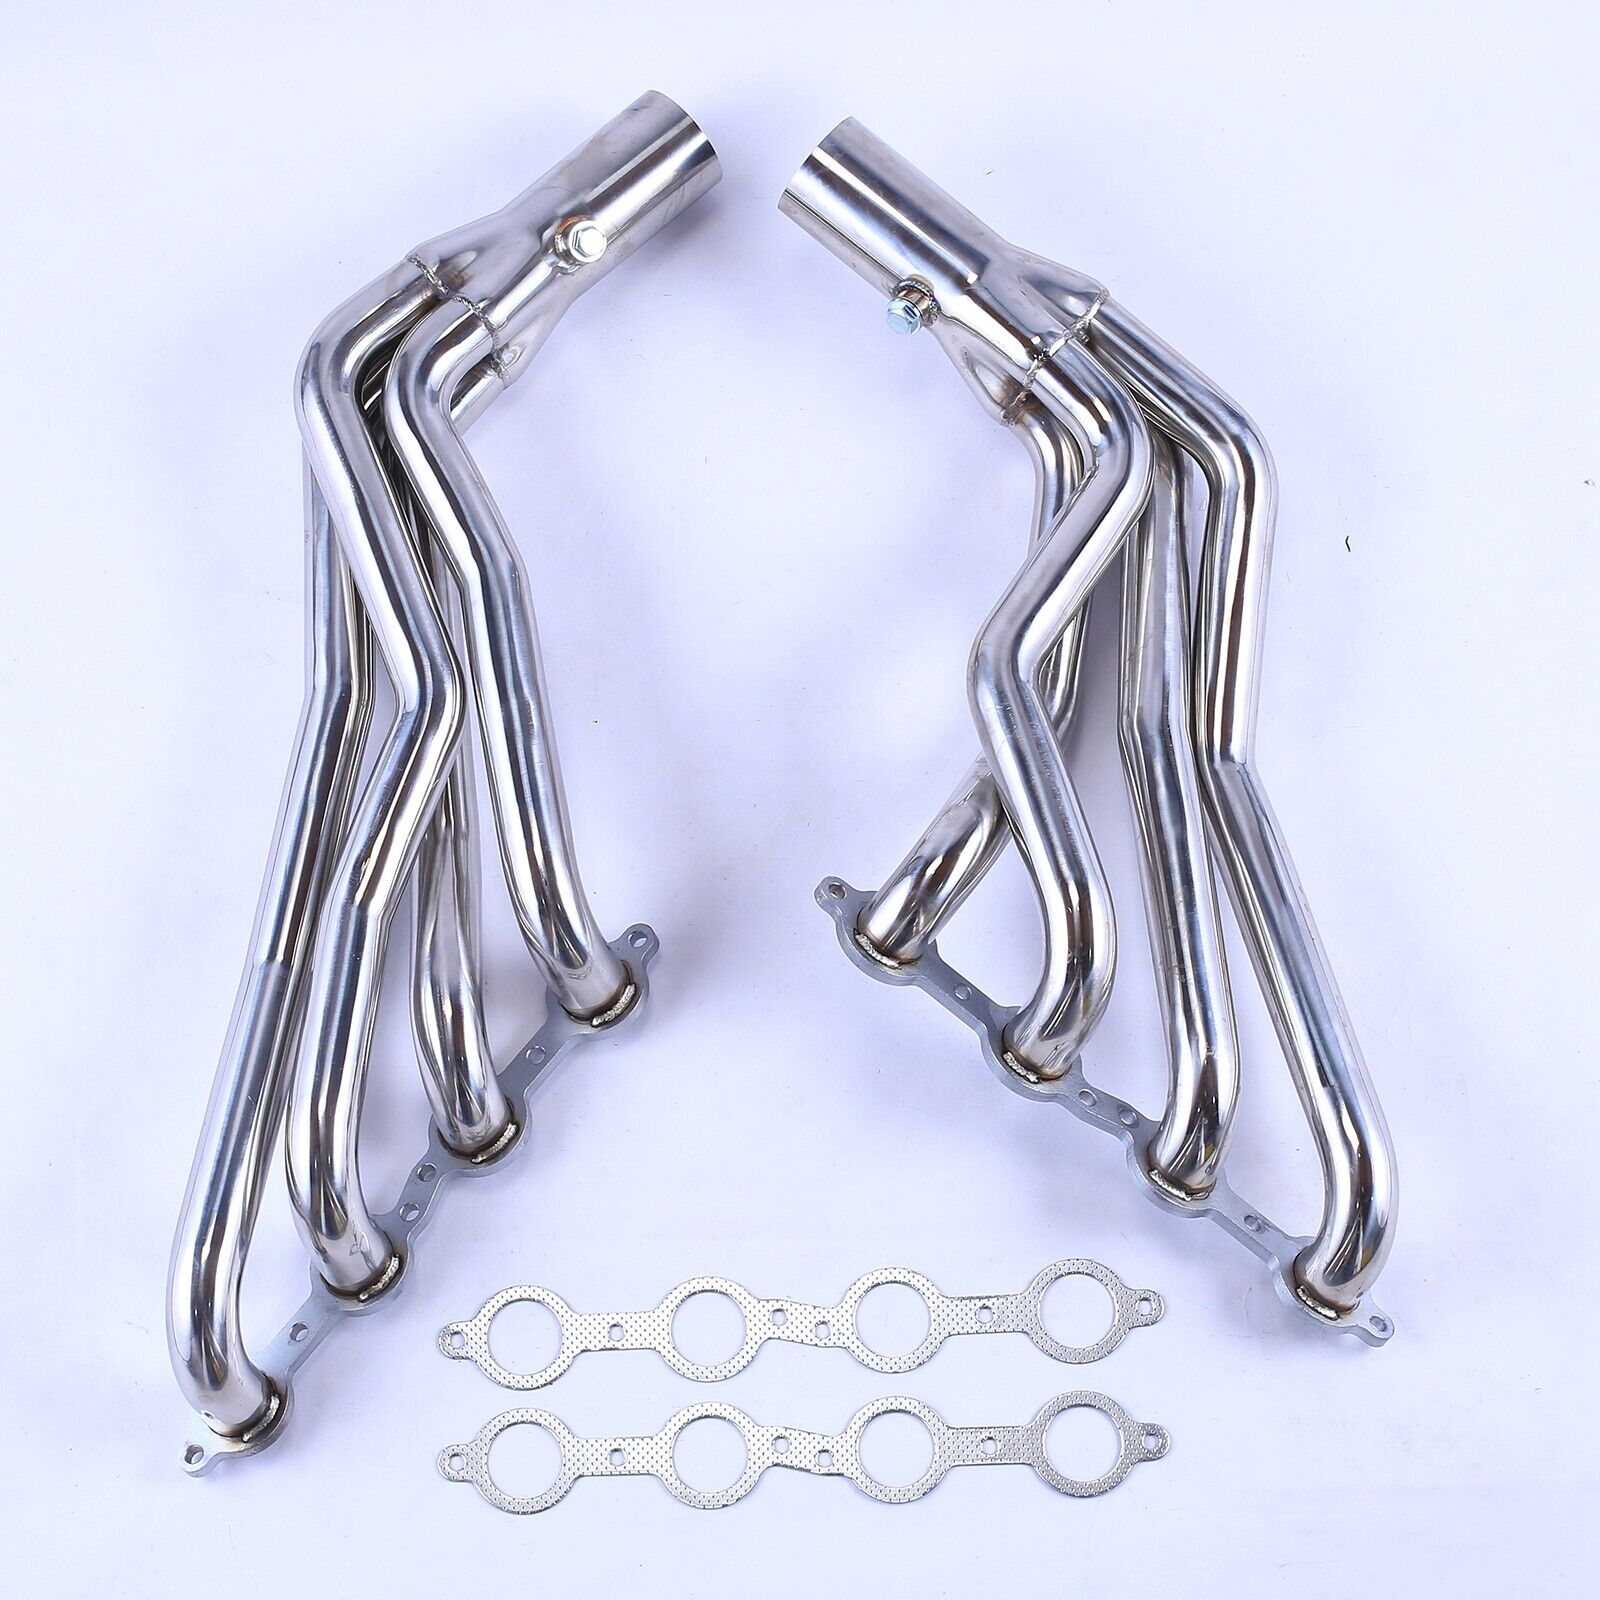 Stainless Steel Headers Manifold w/ Gaskets for Chevy GMC 07-14 4.8L 5.3L 6.0L